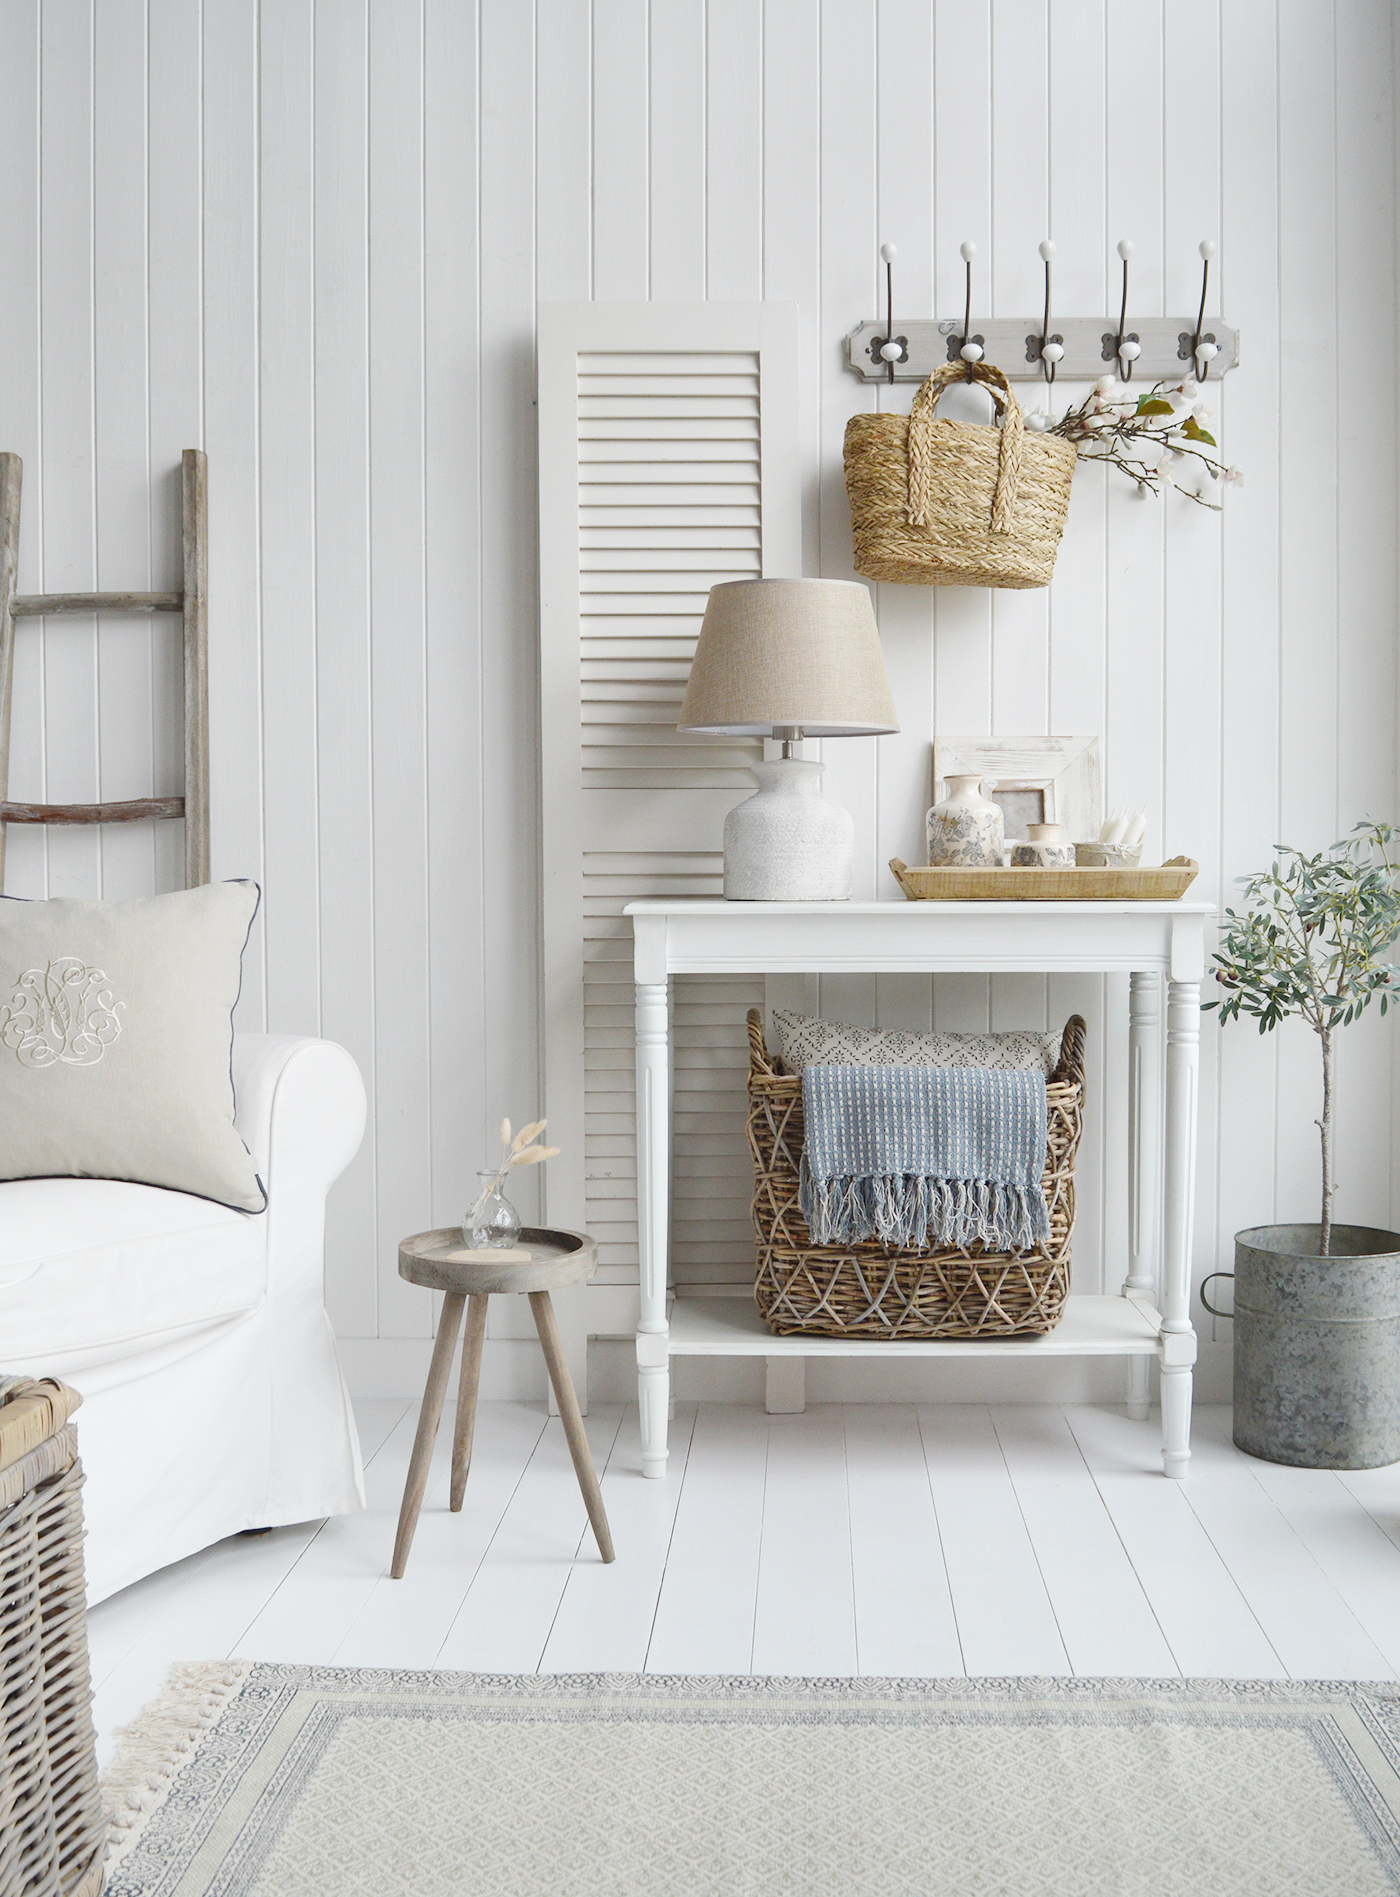 New England furniture for coastal, modern farmhouse and country homes in the UK